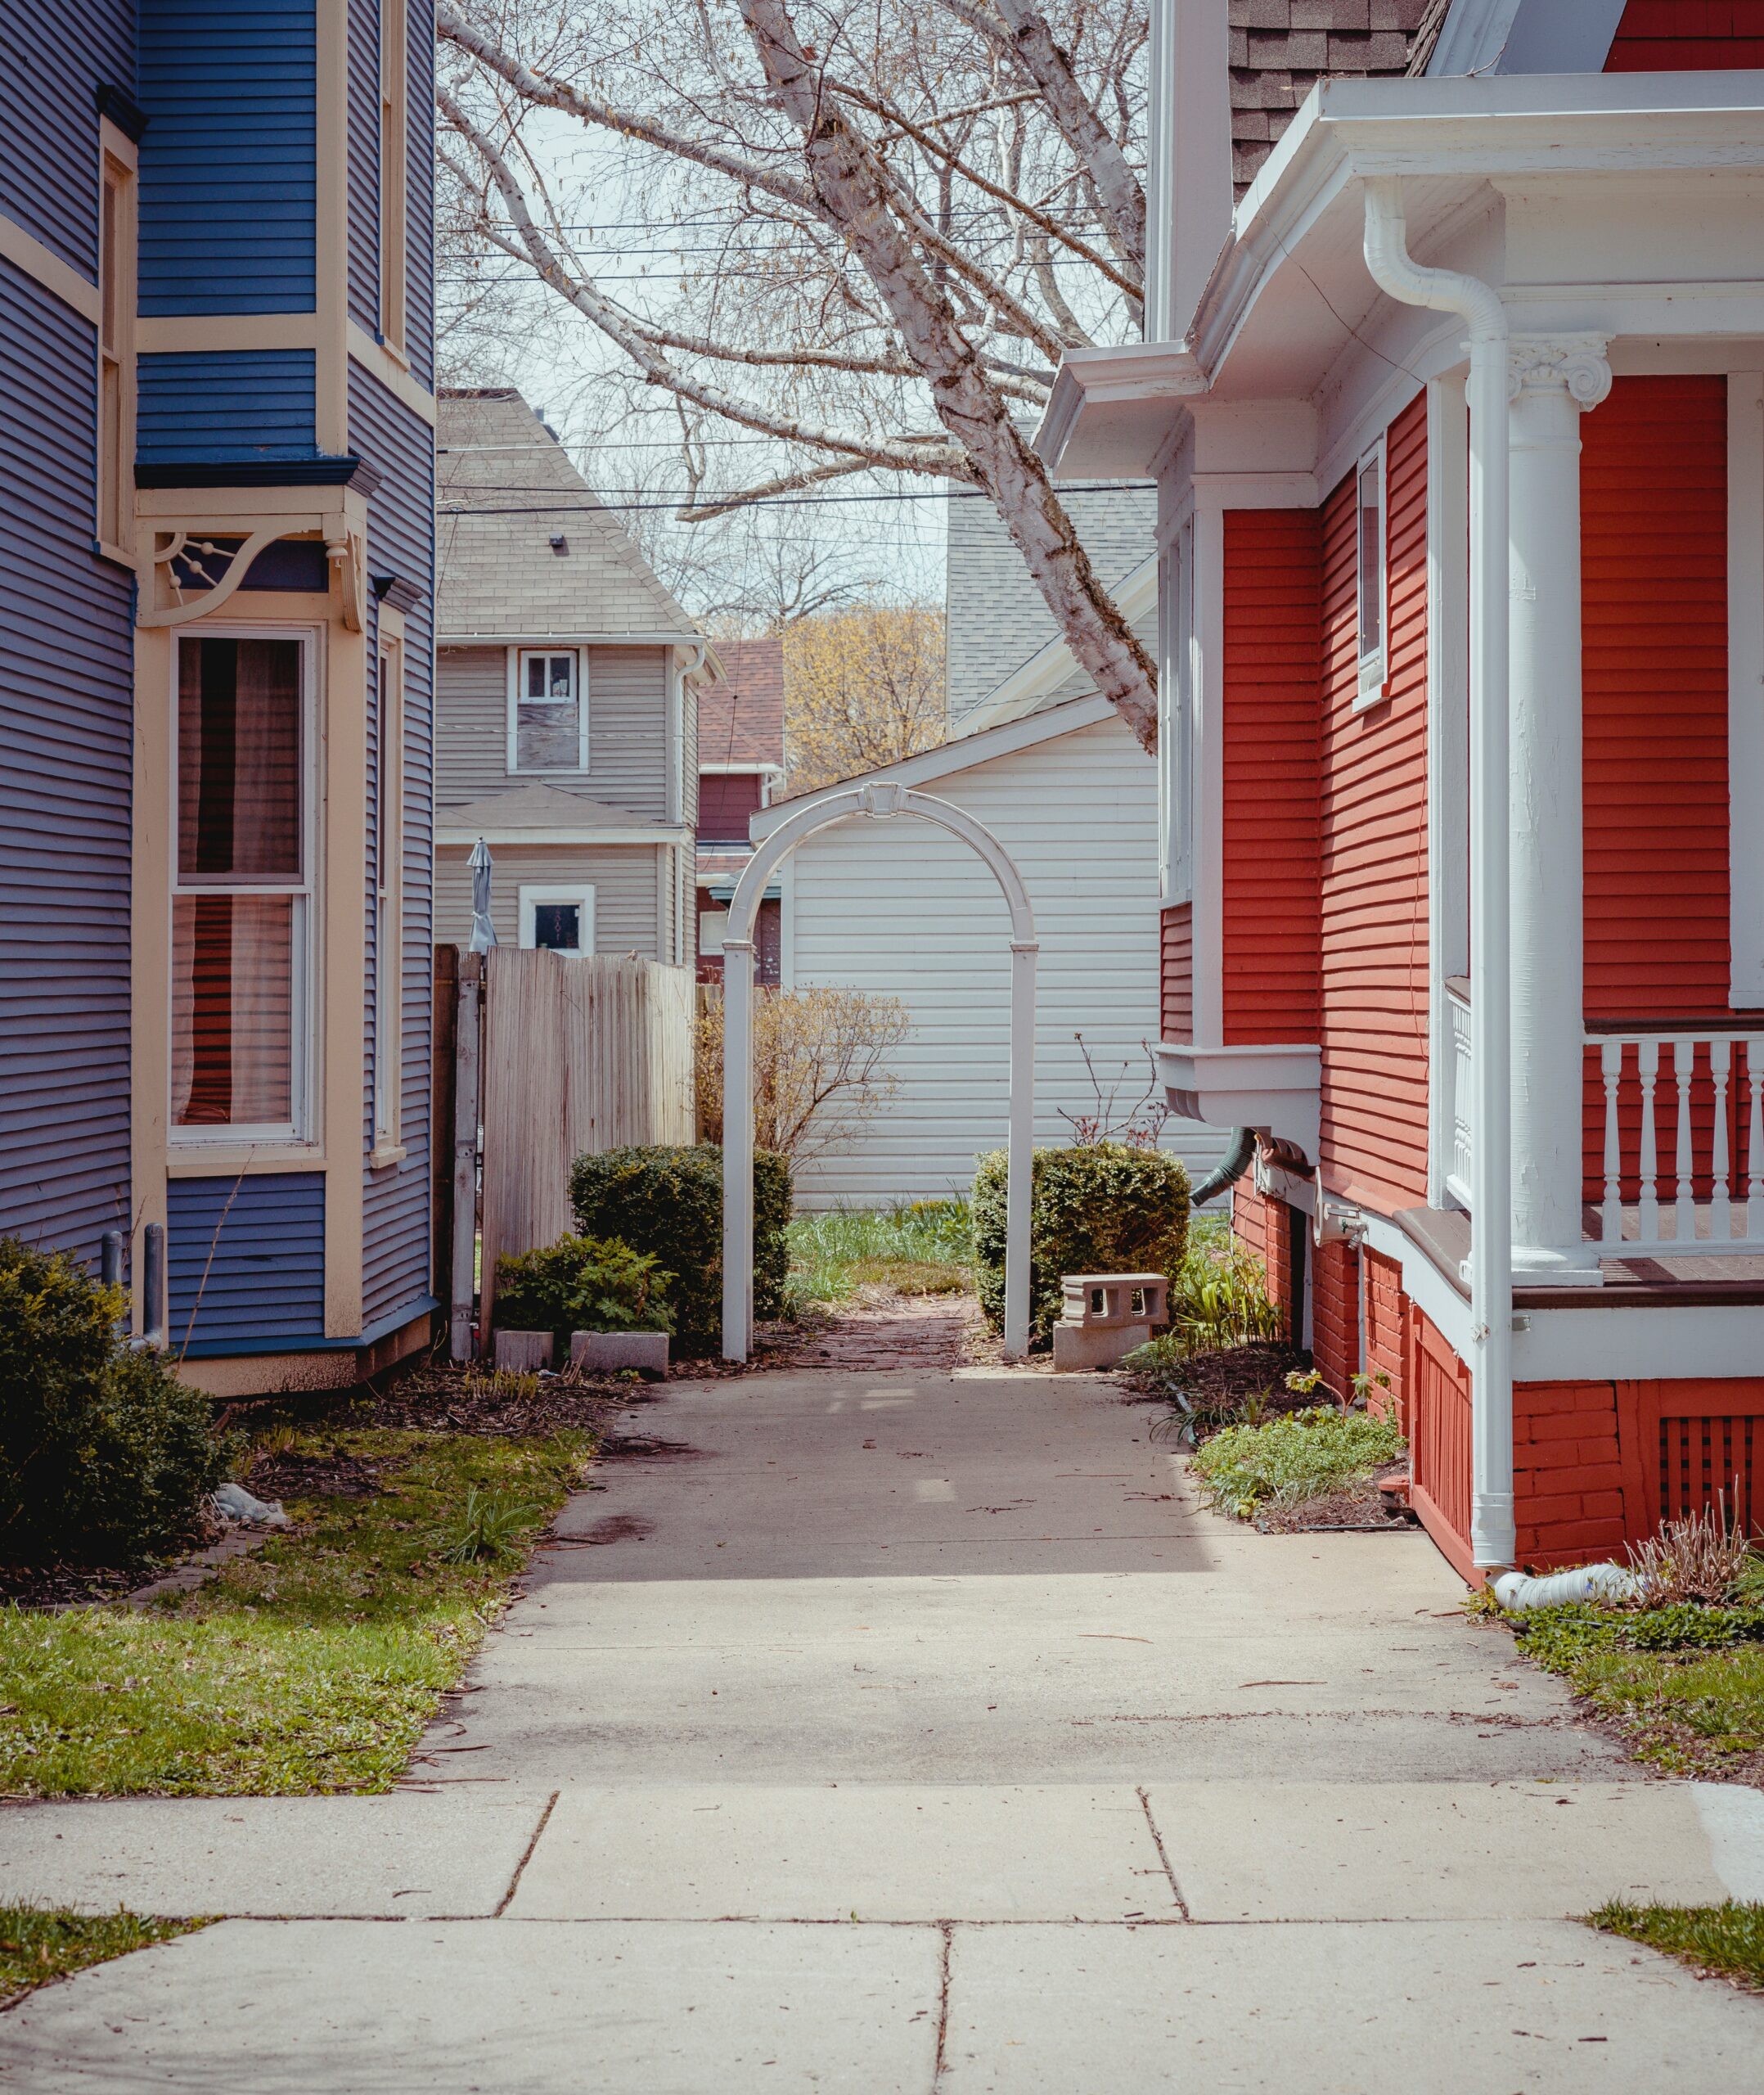 A view of a shared driveway between a blue house and a red house